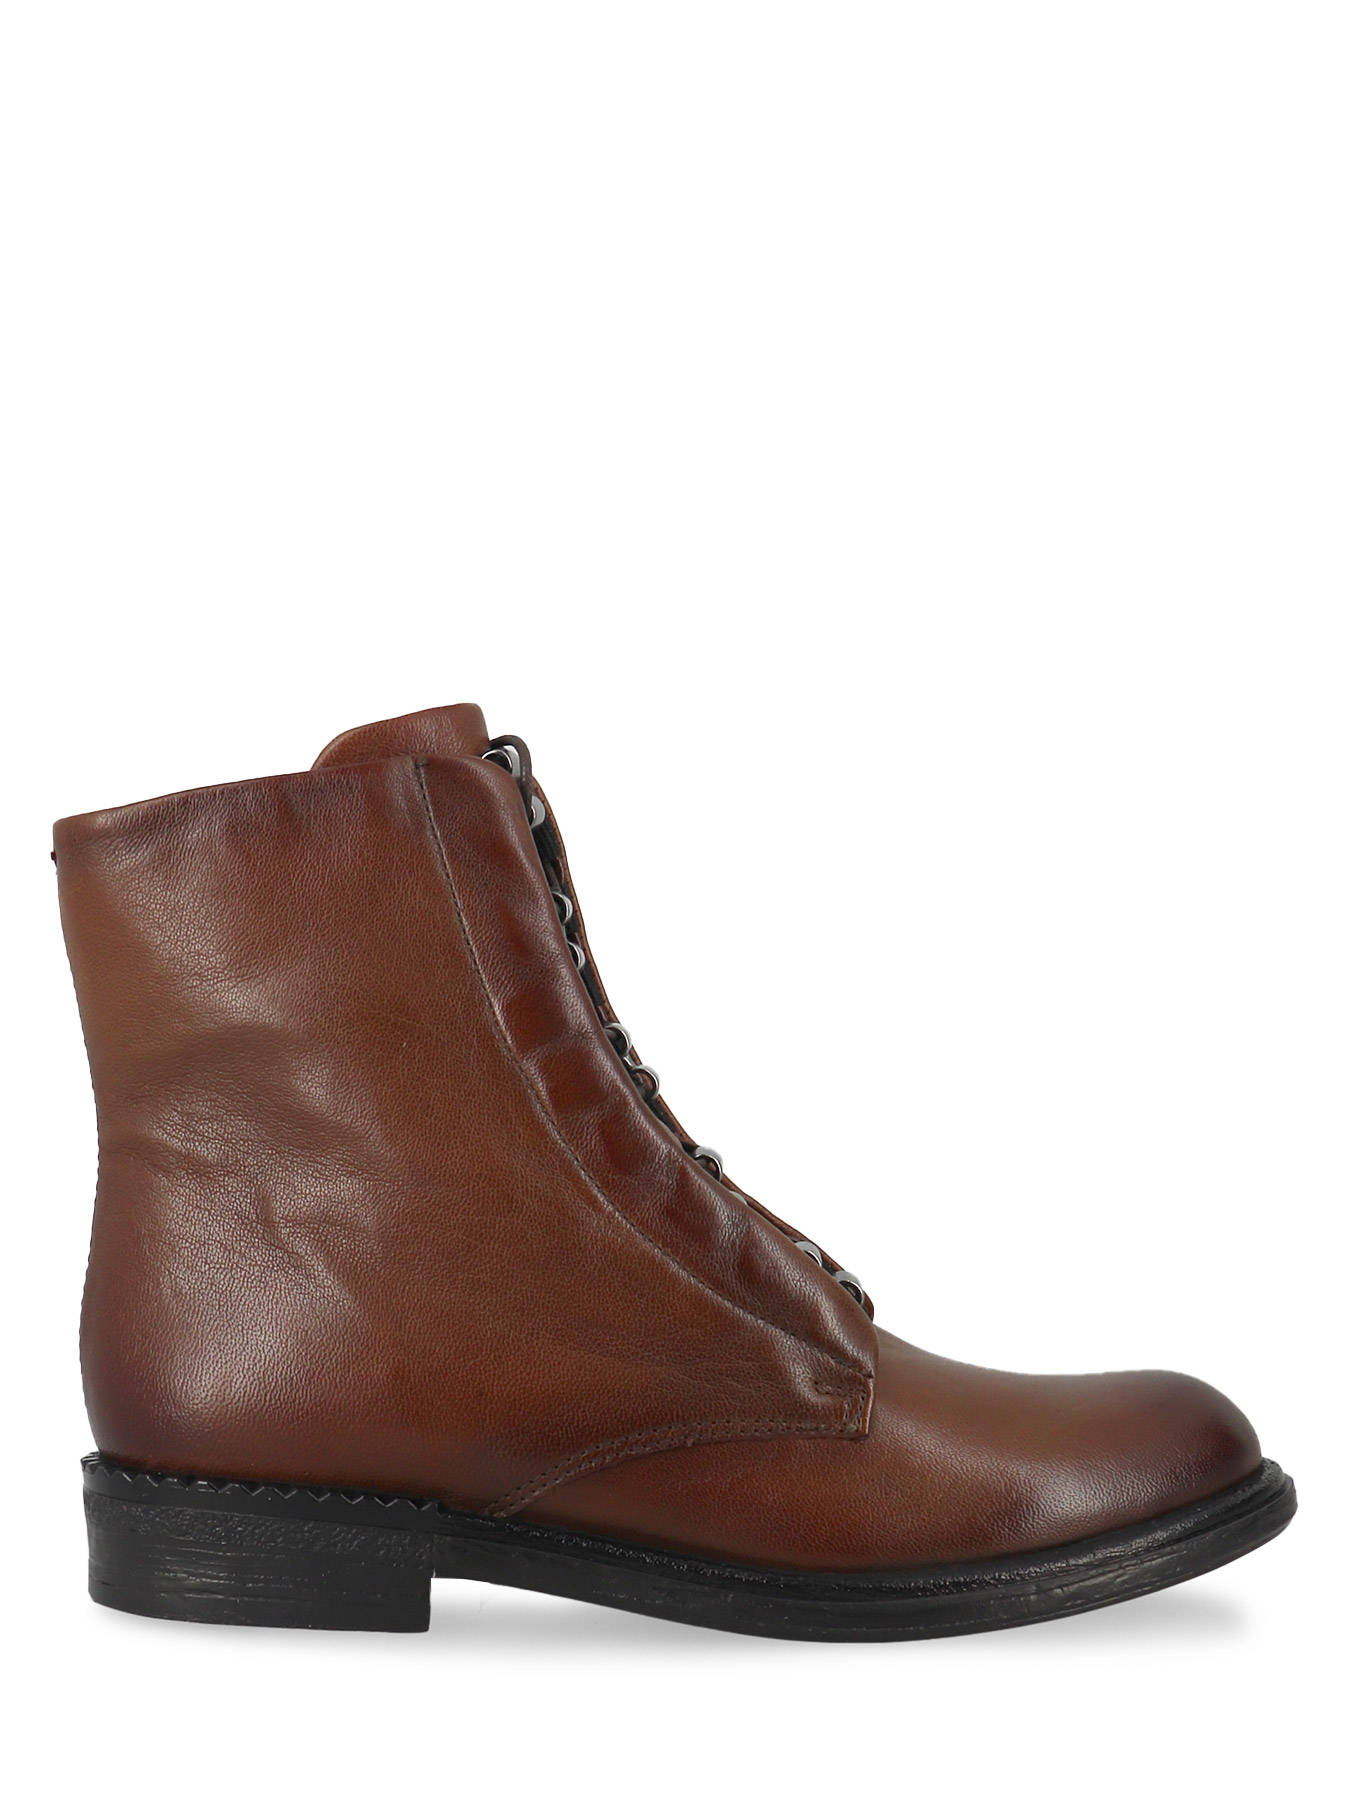 Mjus Boots M56204-301 - best prices